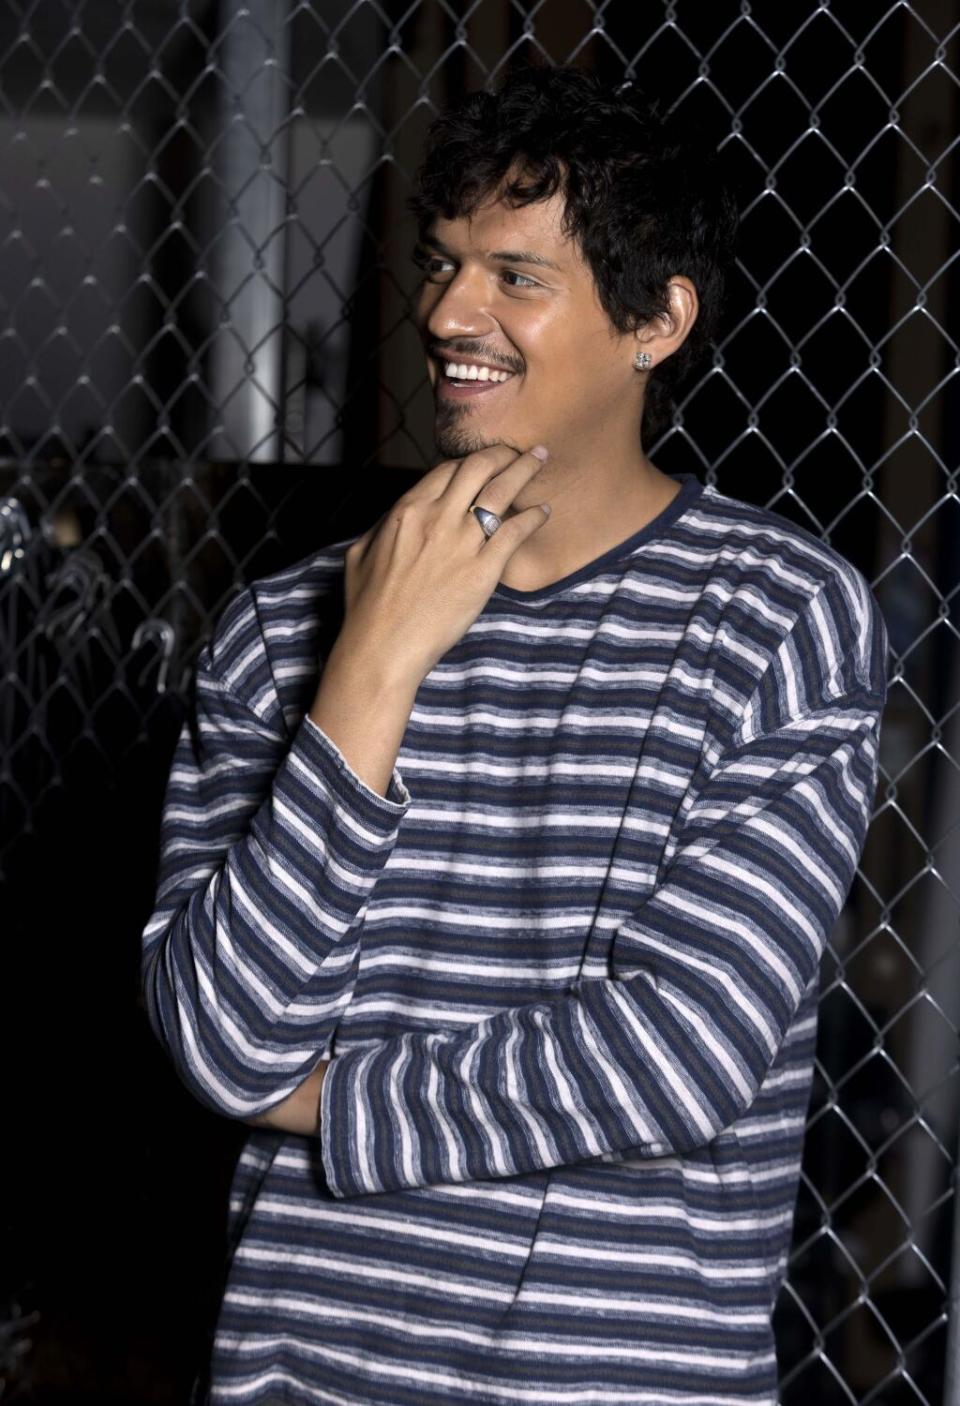 Omar Apollo wearing a striped shirt, smiling with his hand to his chin.